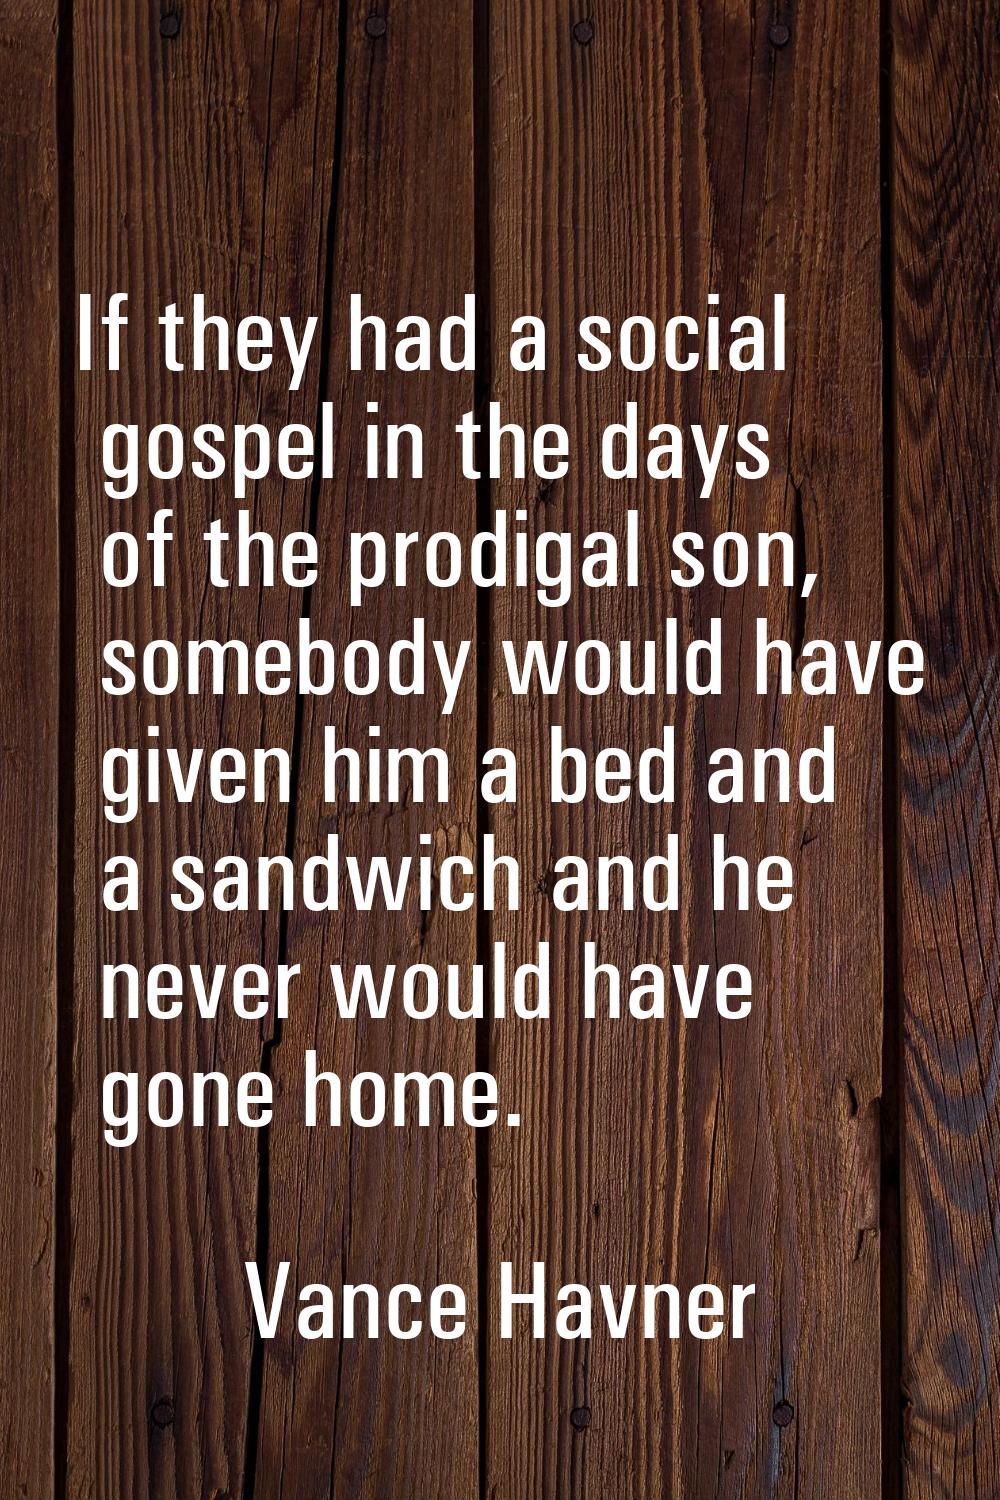 If they had a social gospel in the days of the prodigal son, somebody would have given him a bed an